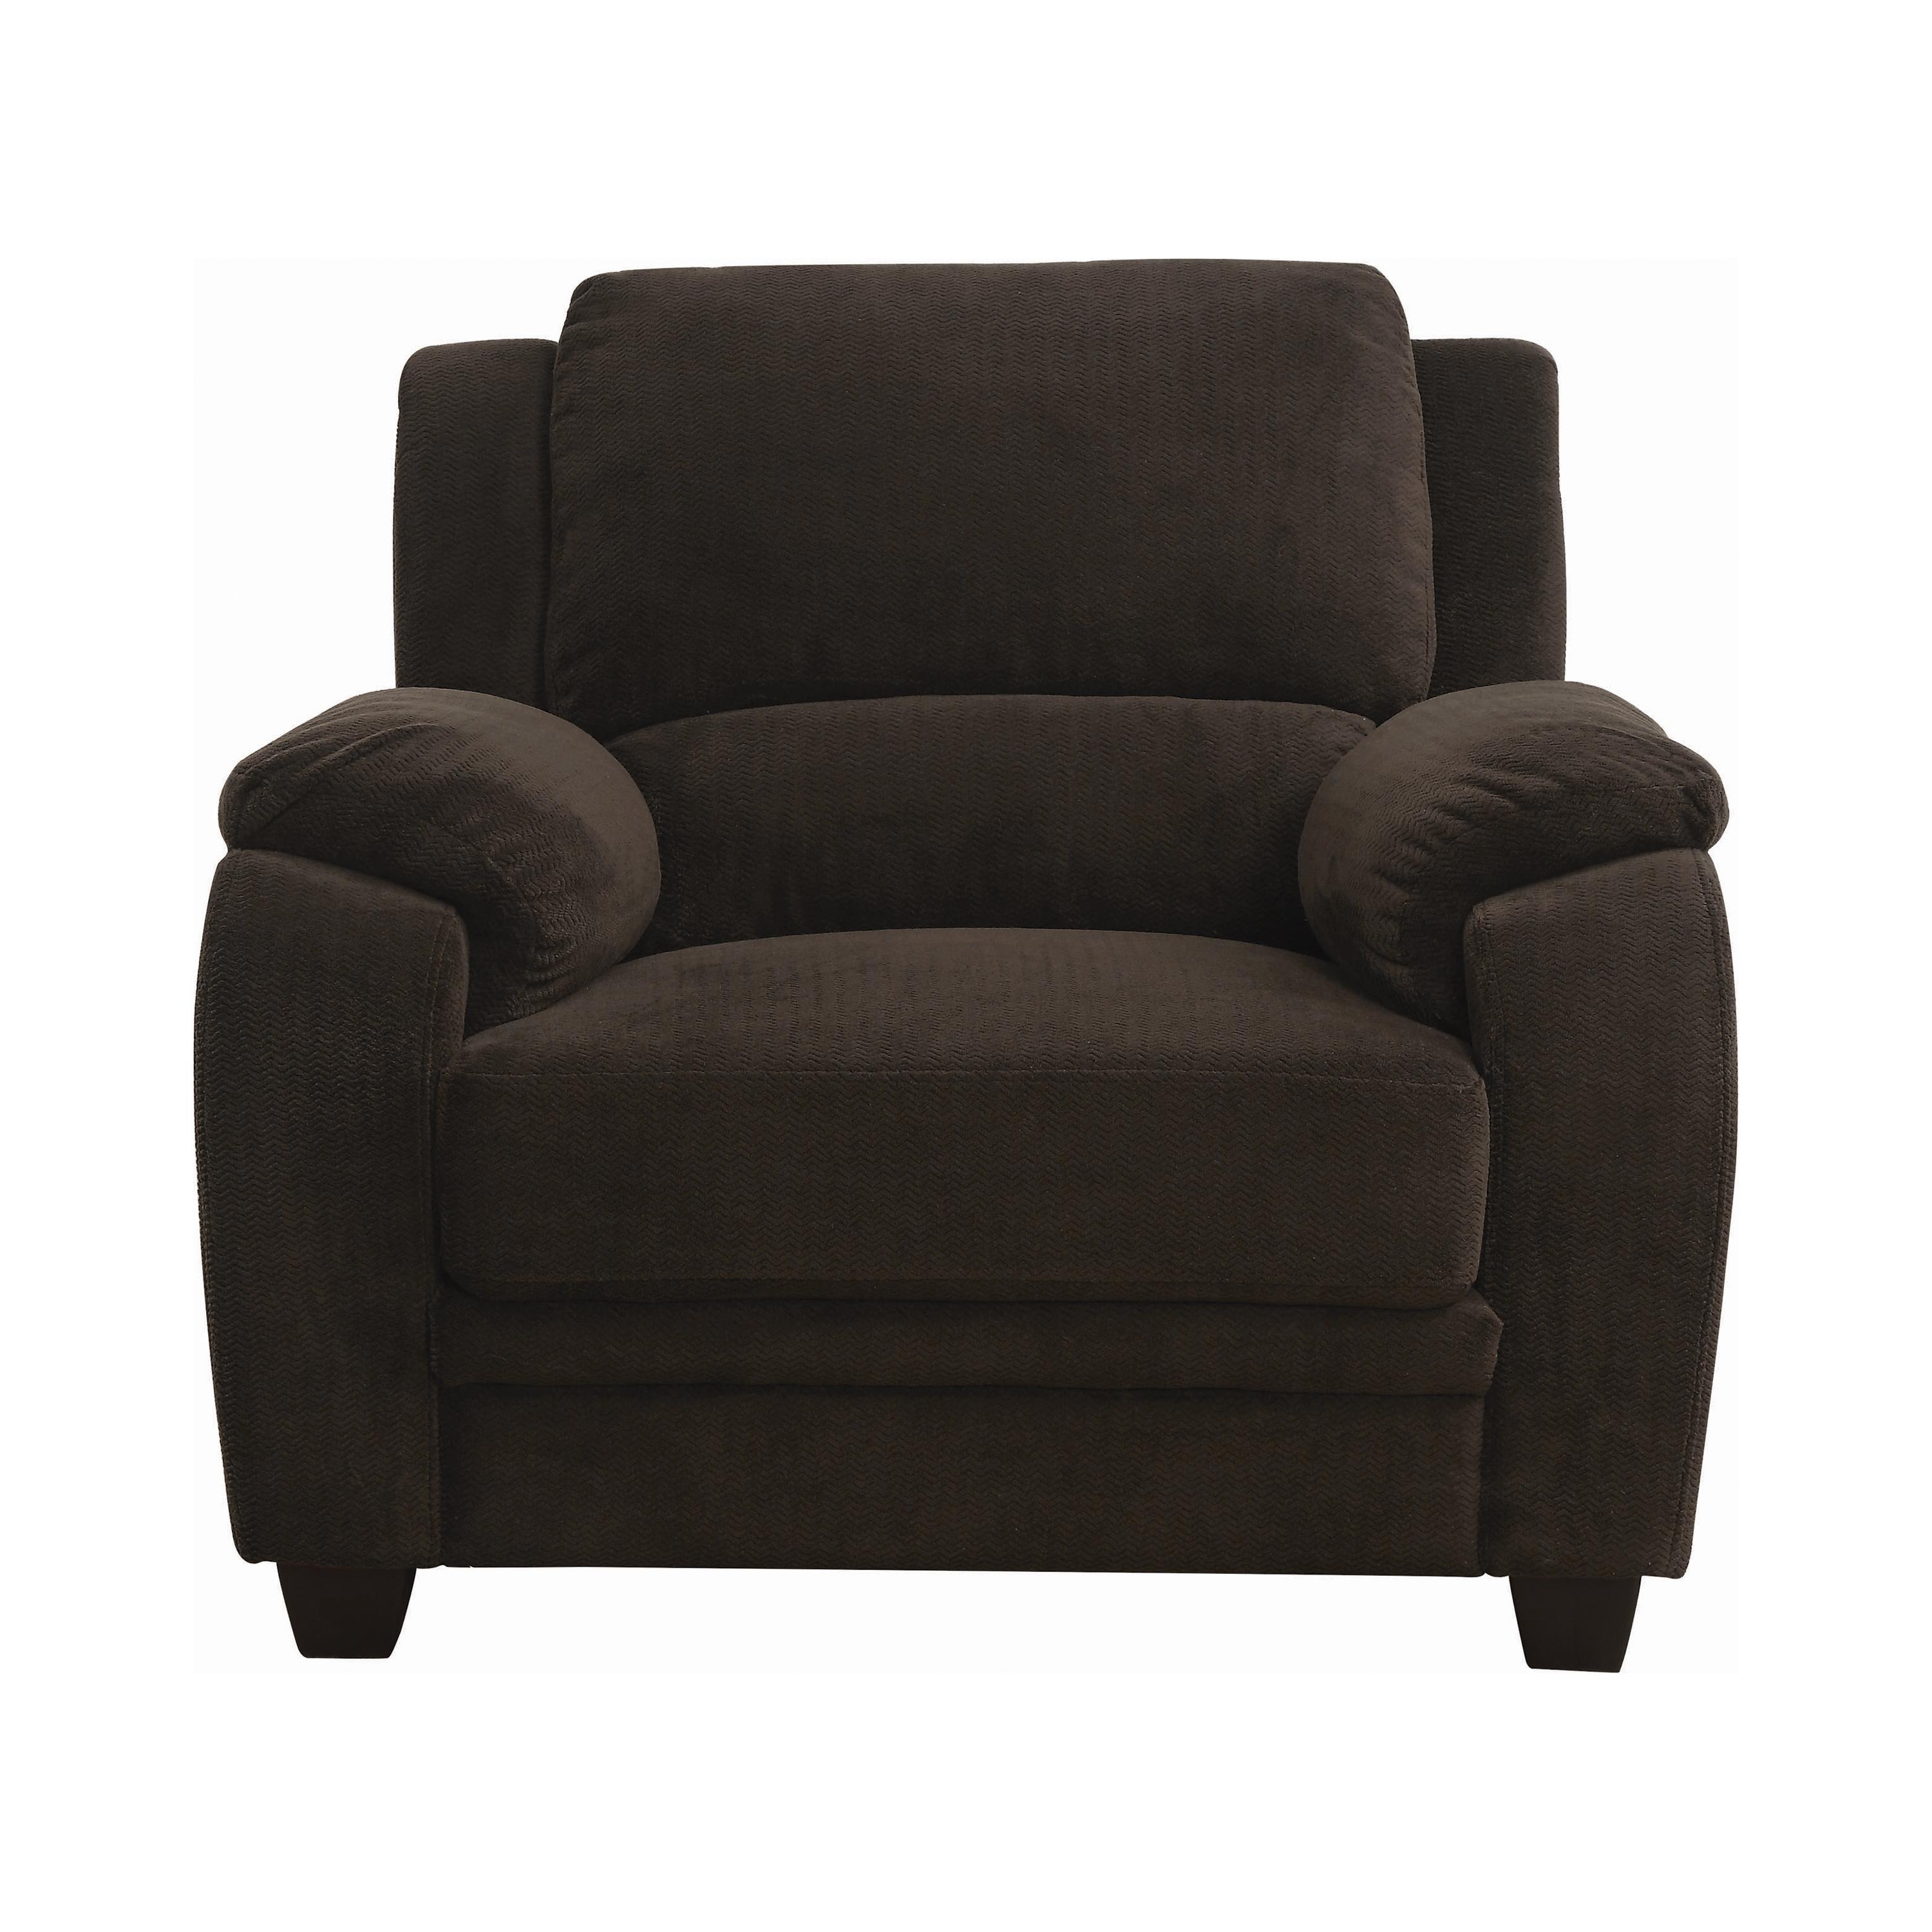 Transitional Arm Chair 506246 Northend 506246 in Chocolate 